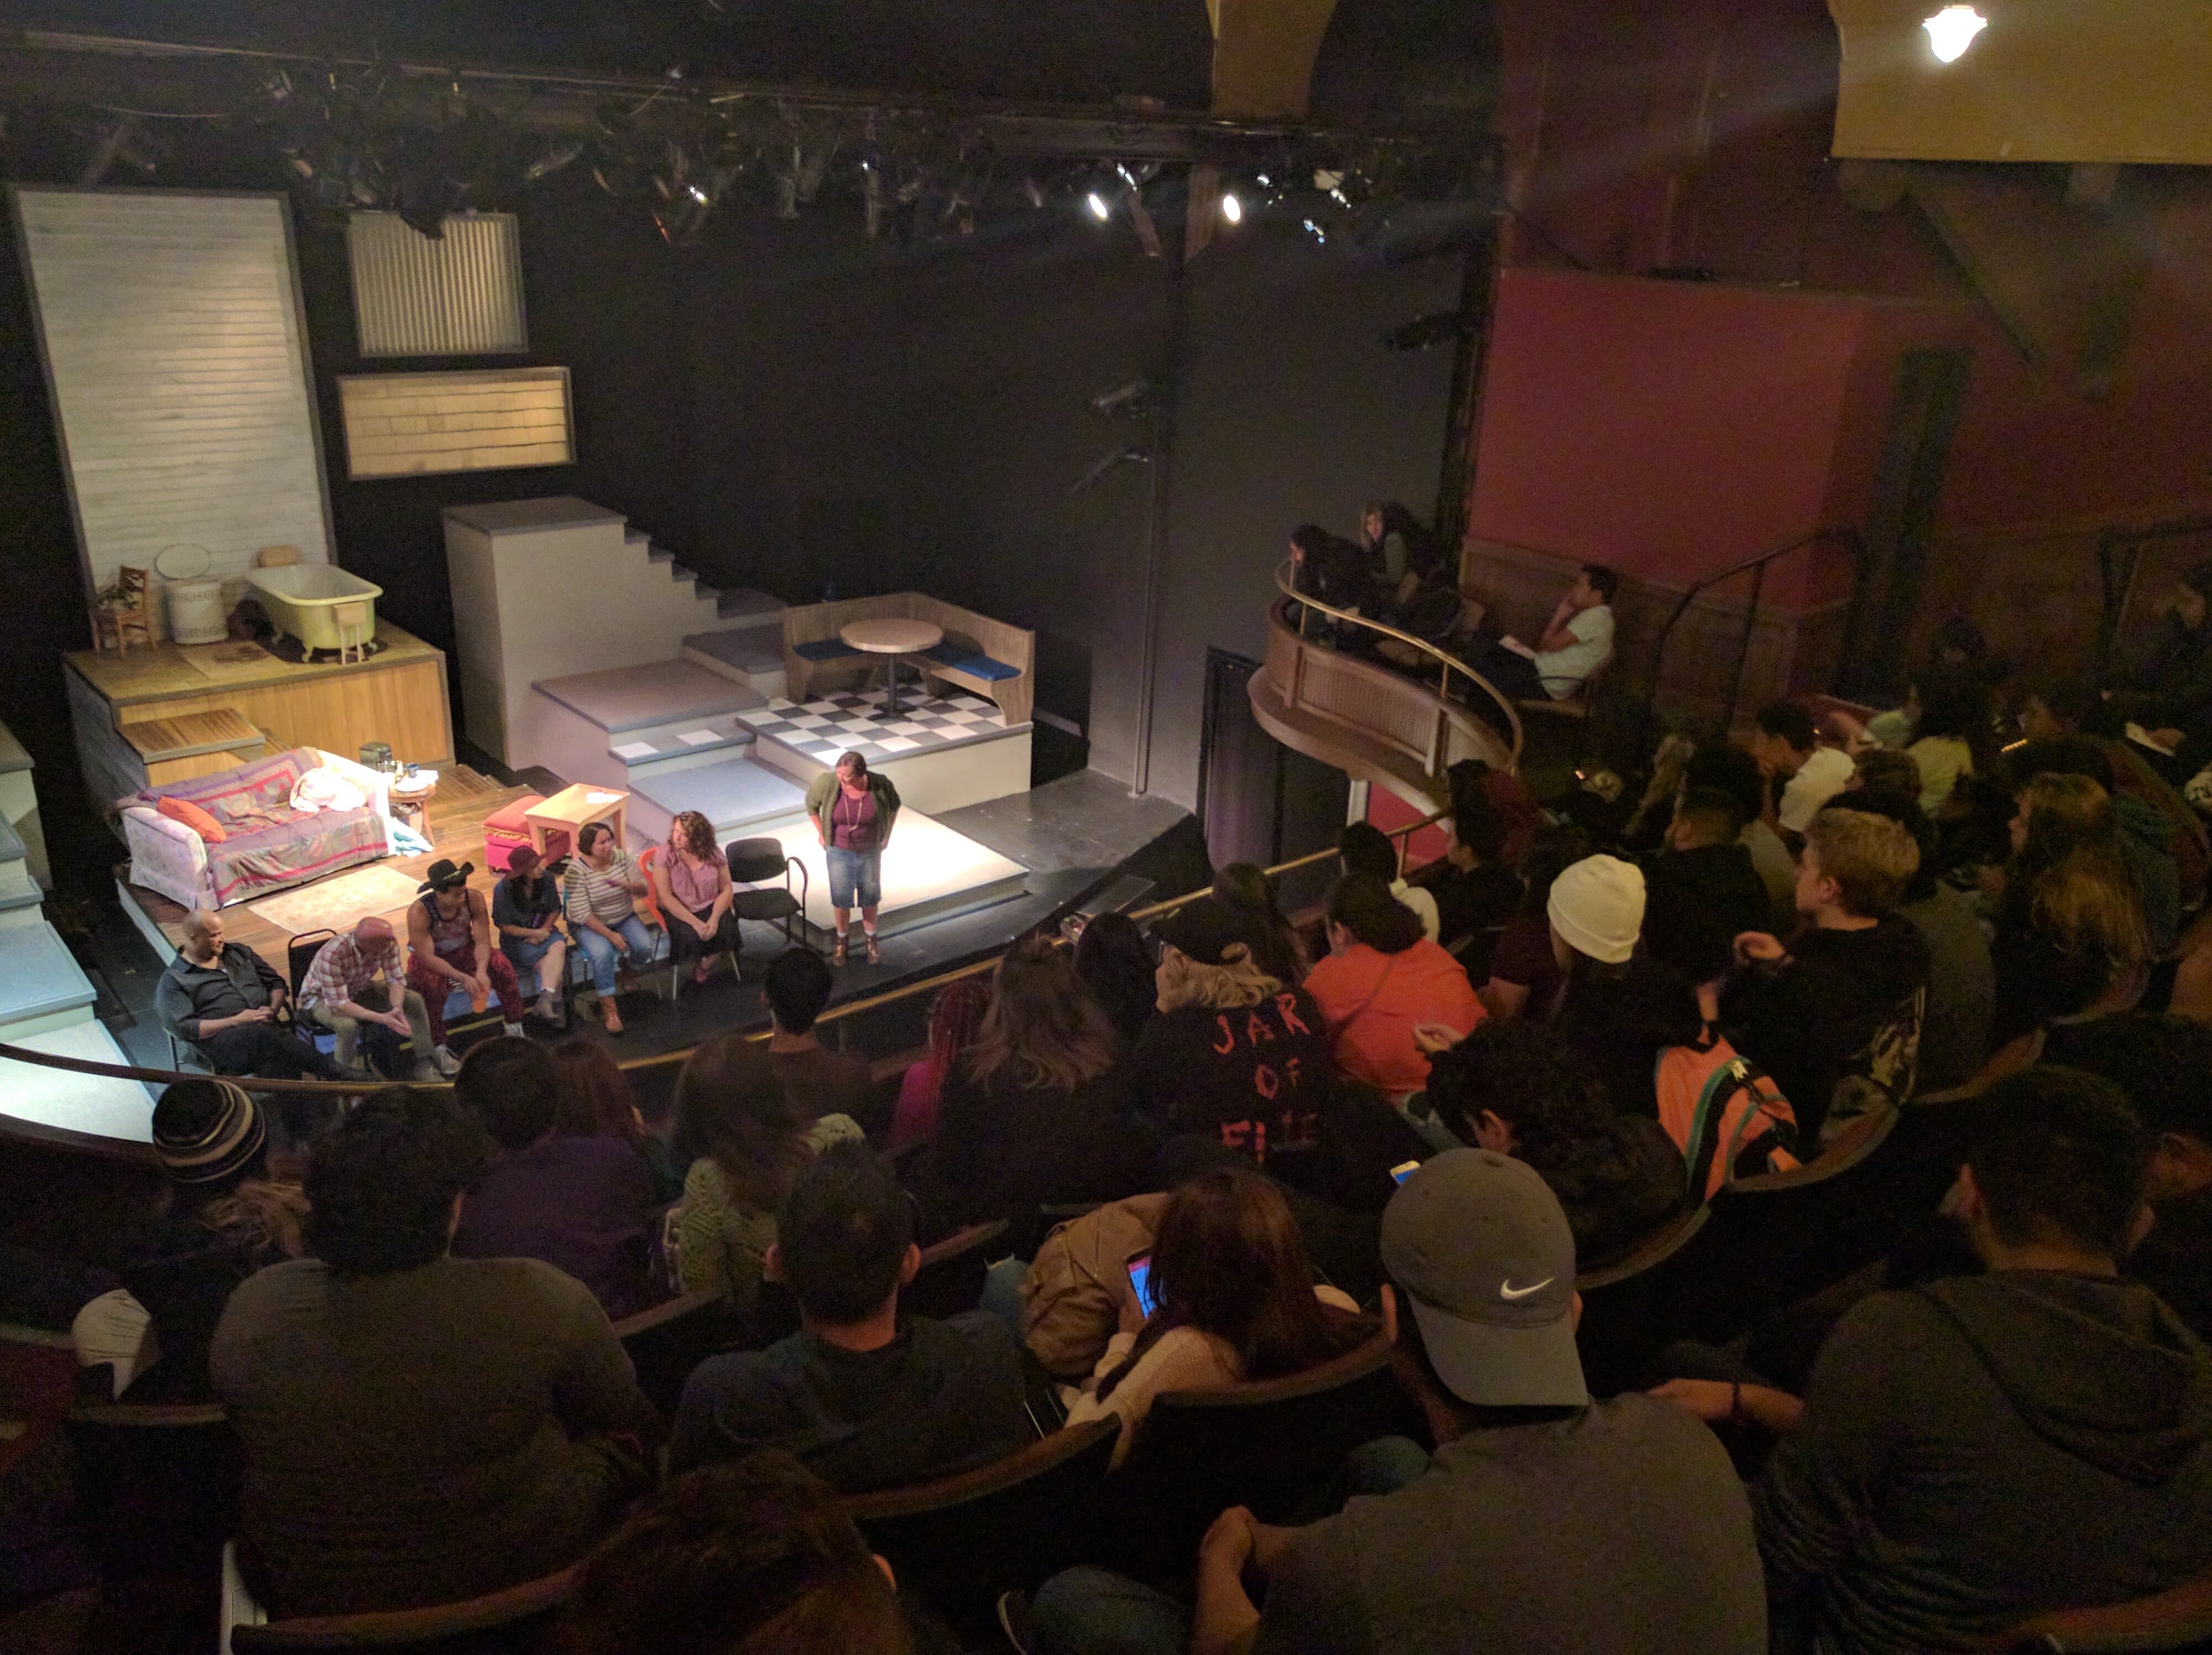 Students pack the seats at Curious Theatre and participate in a question and answer session with the cast of the play they are about to see.